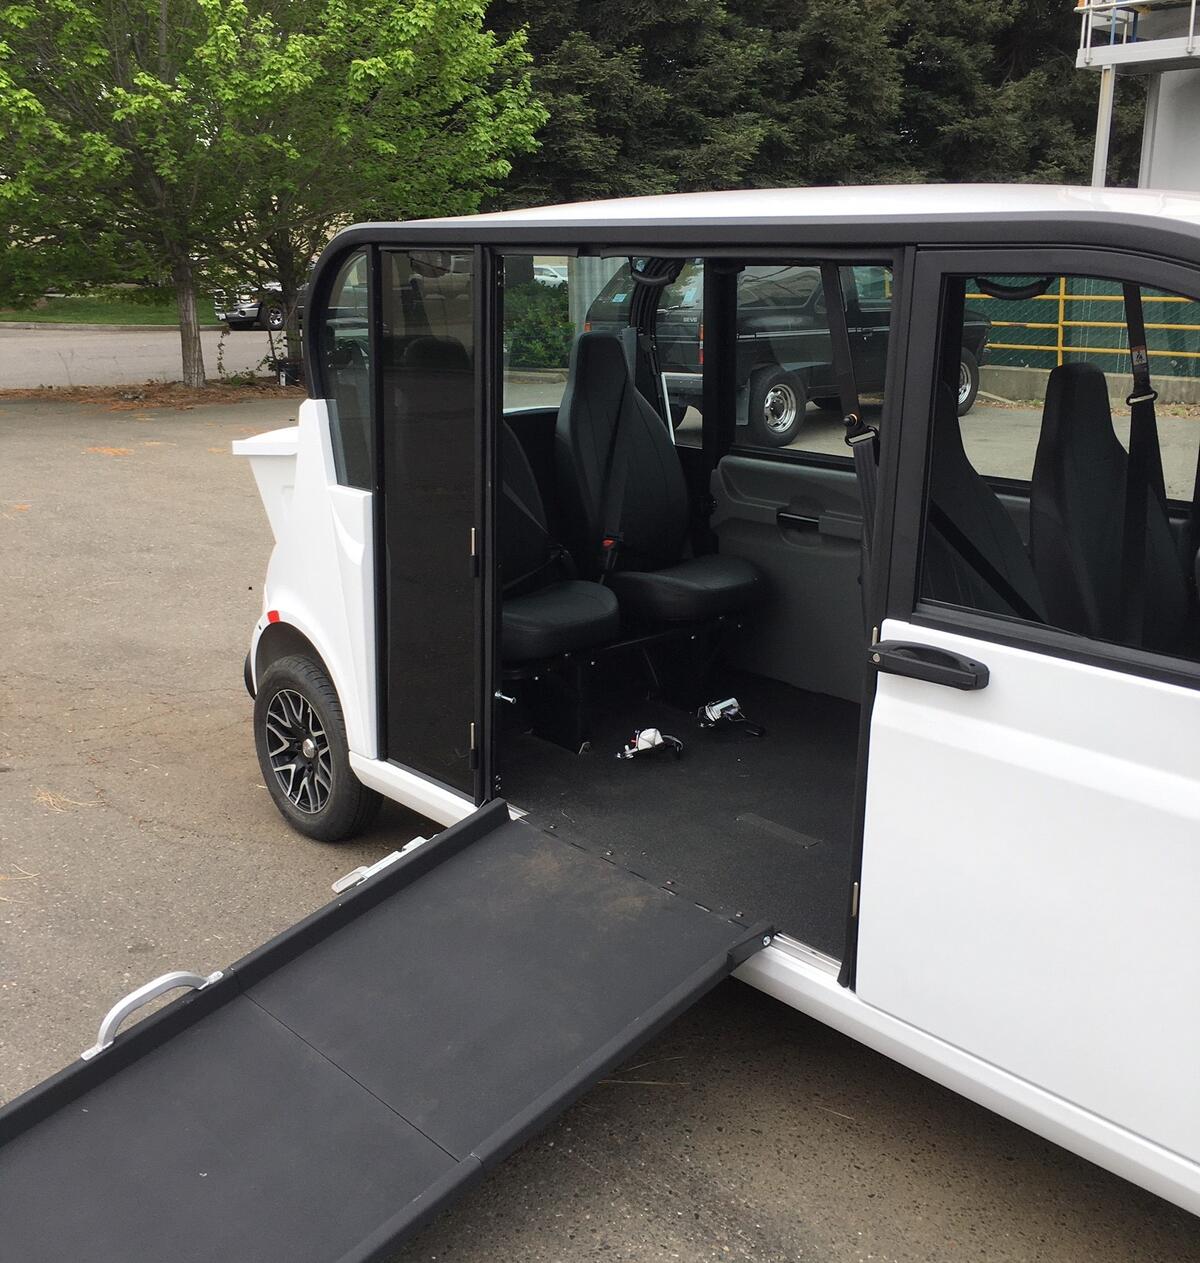 Image of the new campus wheelchair accessible van